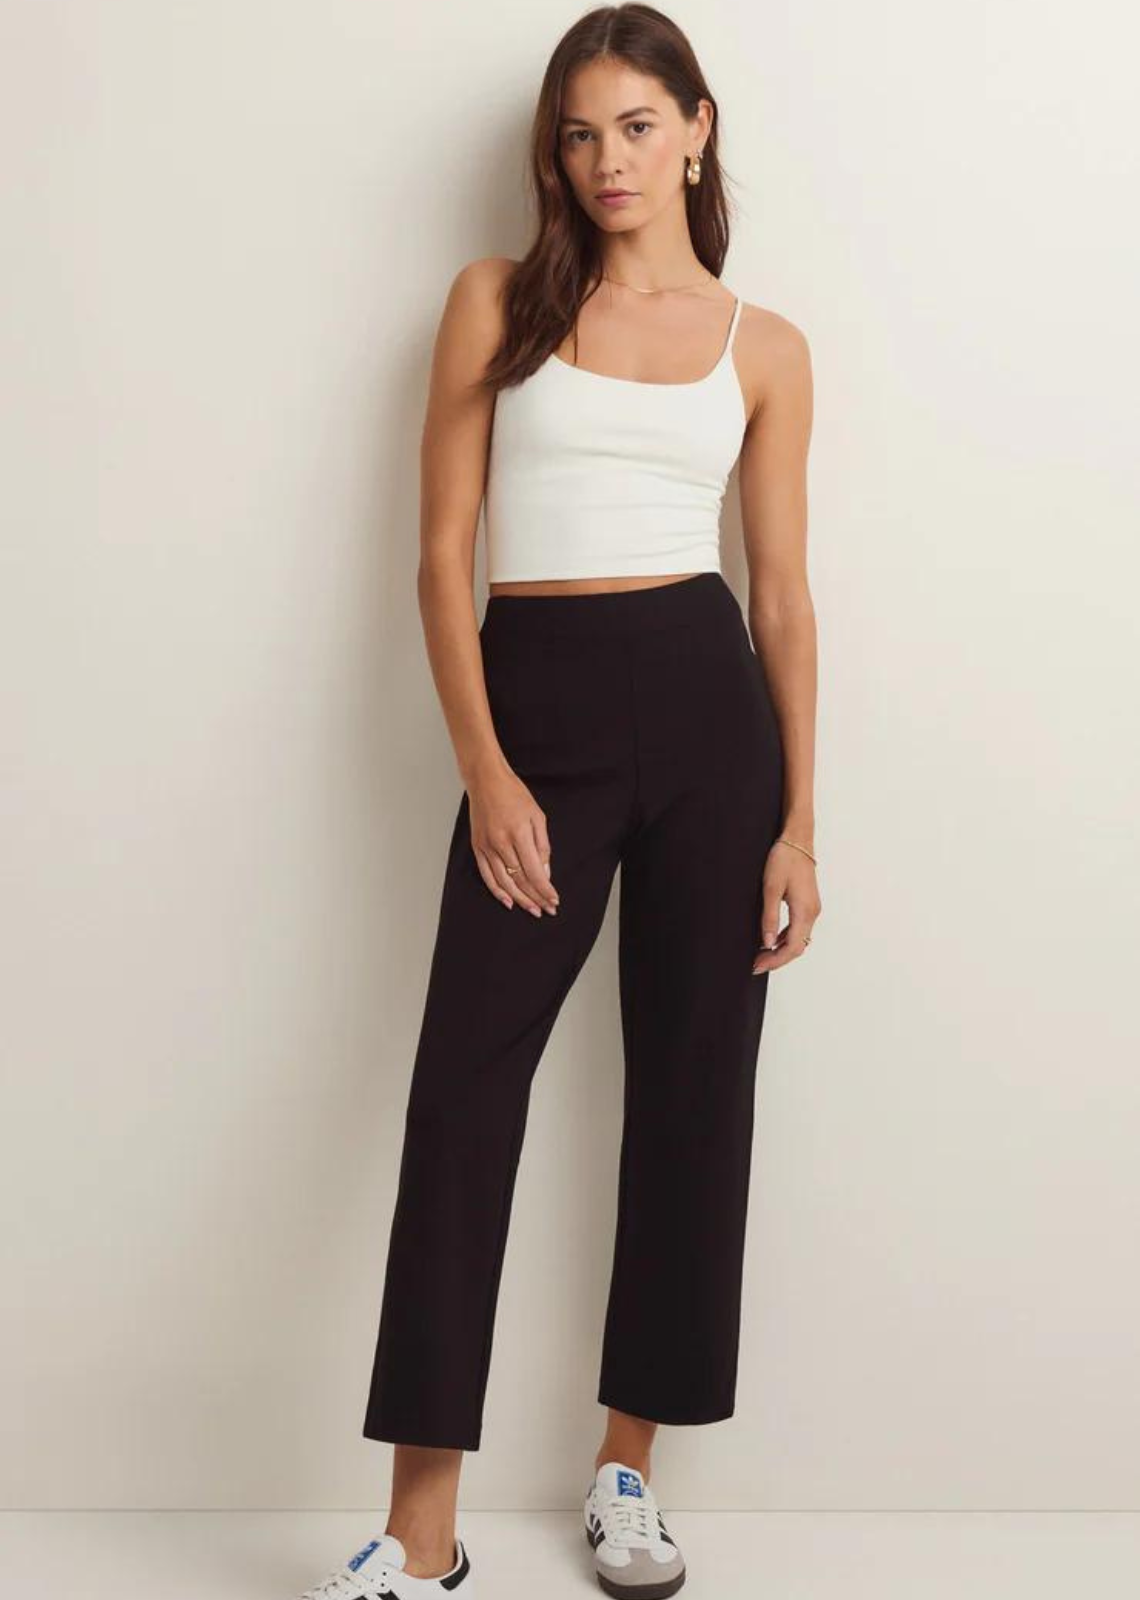 Fashion Look Featuring Time and Tru Pants by retailfavs - ShopStyle